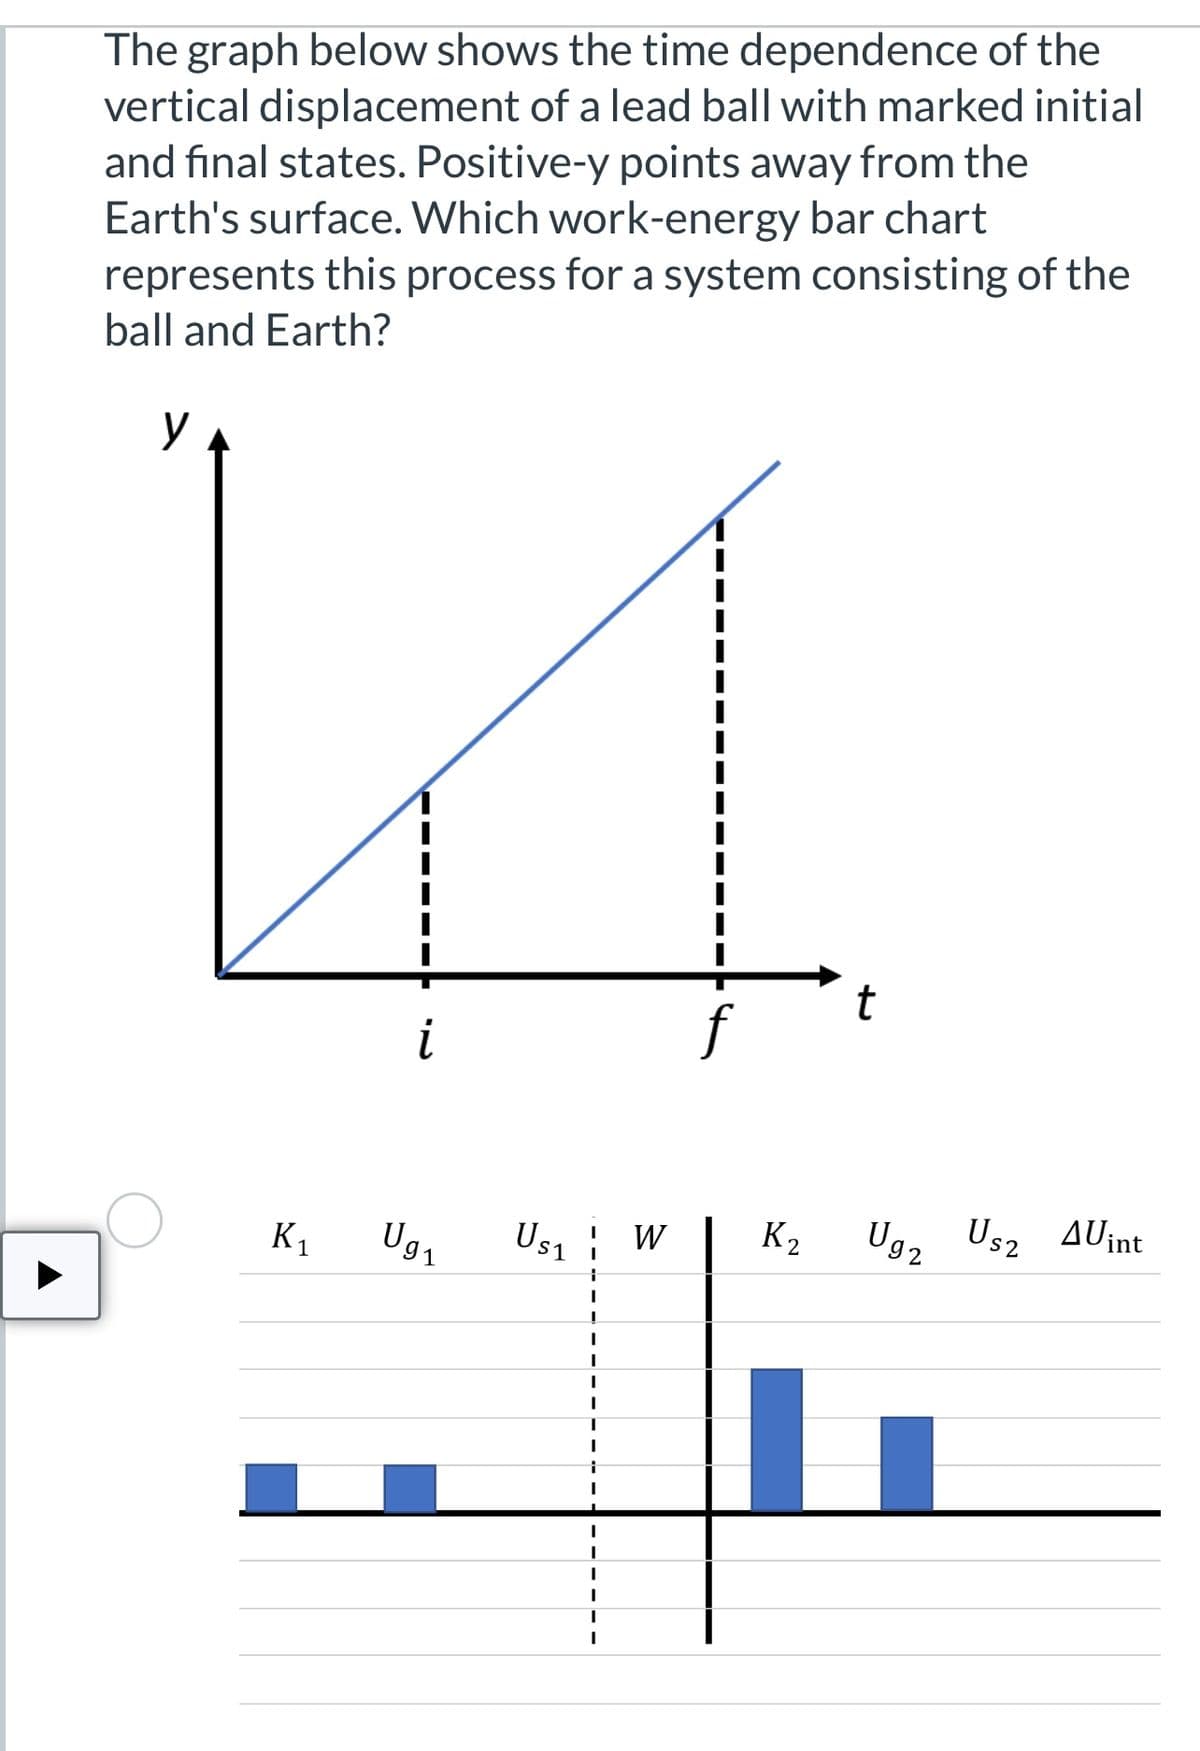 The graph below shows the time dependence of the
vertical displacement of a lead ball with marked initial
and final states. Positive-y points away from the
Earth's surface. Which work-energy bar chart
represents this process for a system consisting of the
ball and Earth?
y
K₁
Ug₁
Us₁
1
I
I
I
I
I
I
T
I
i
I
I
I
I
I
I
I
W
K₂
t
Ug₂
Us2
AUint